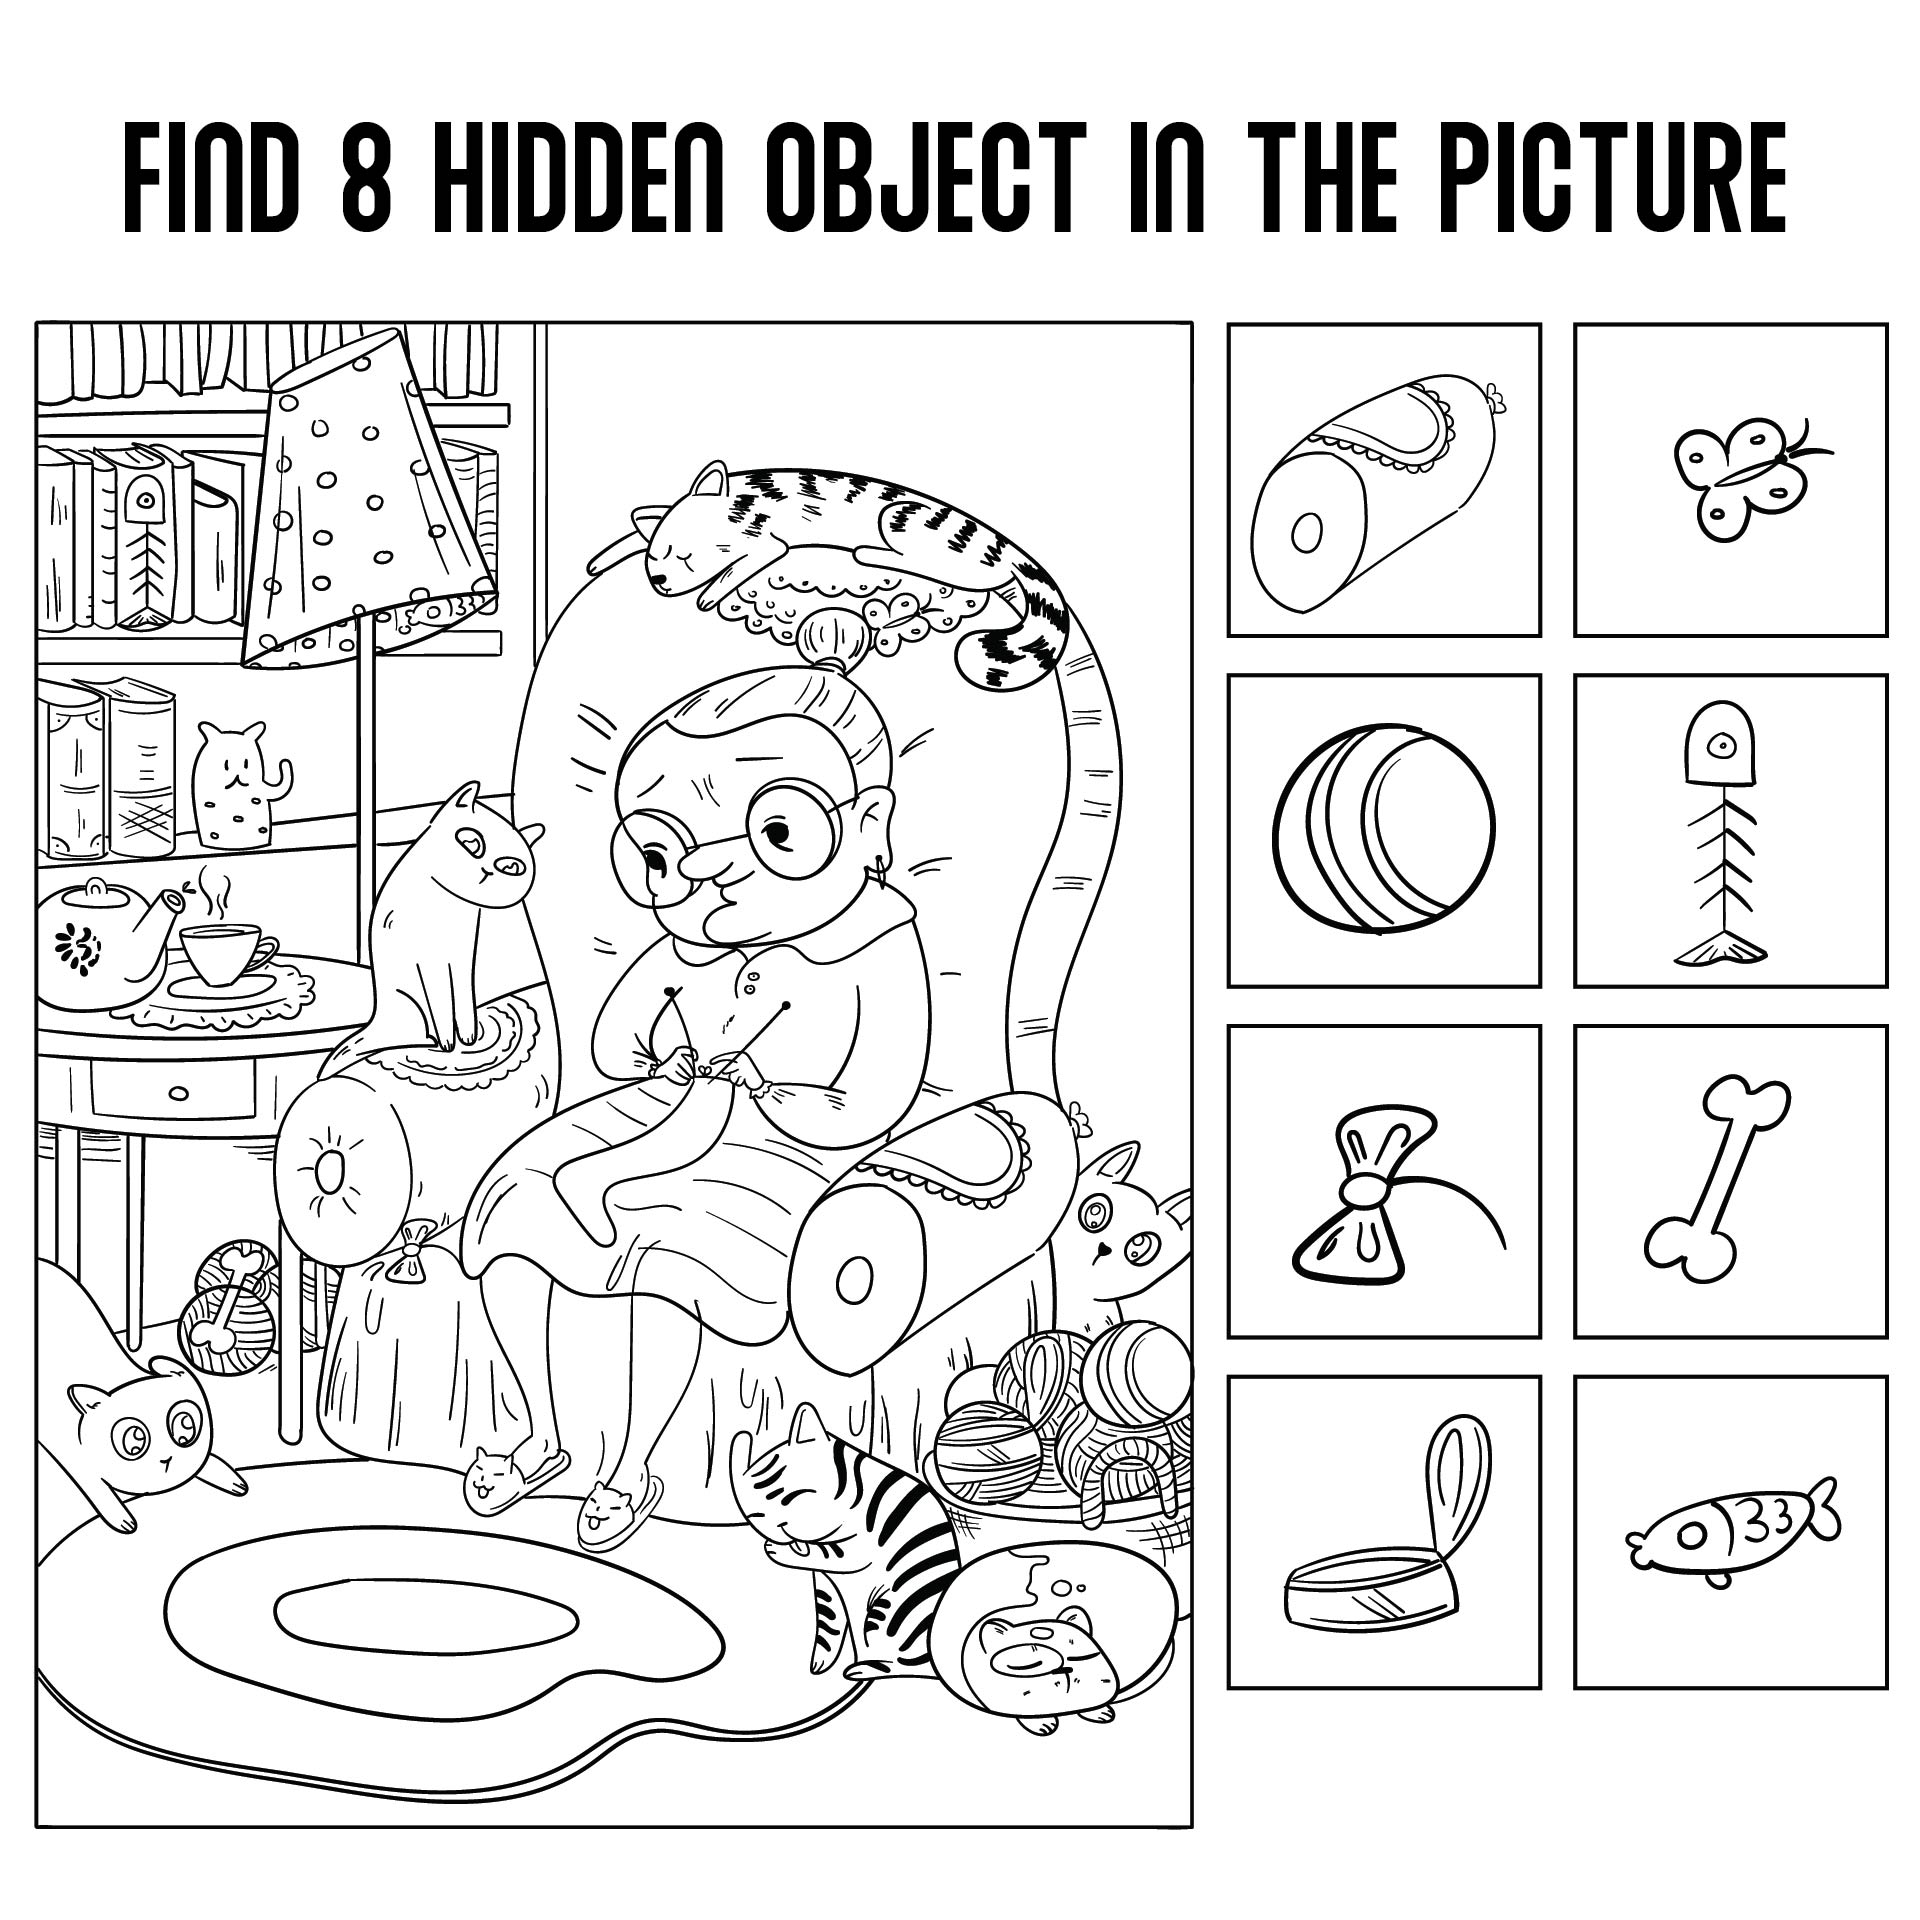 6-best-images-of-easy-hidden-object-printables-free-printable-hidden-objects-free-hidden